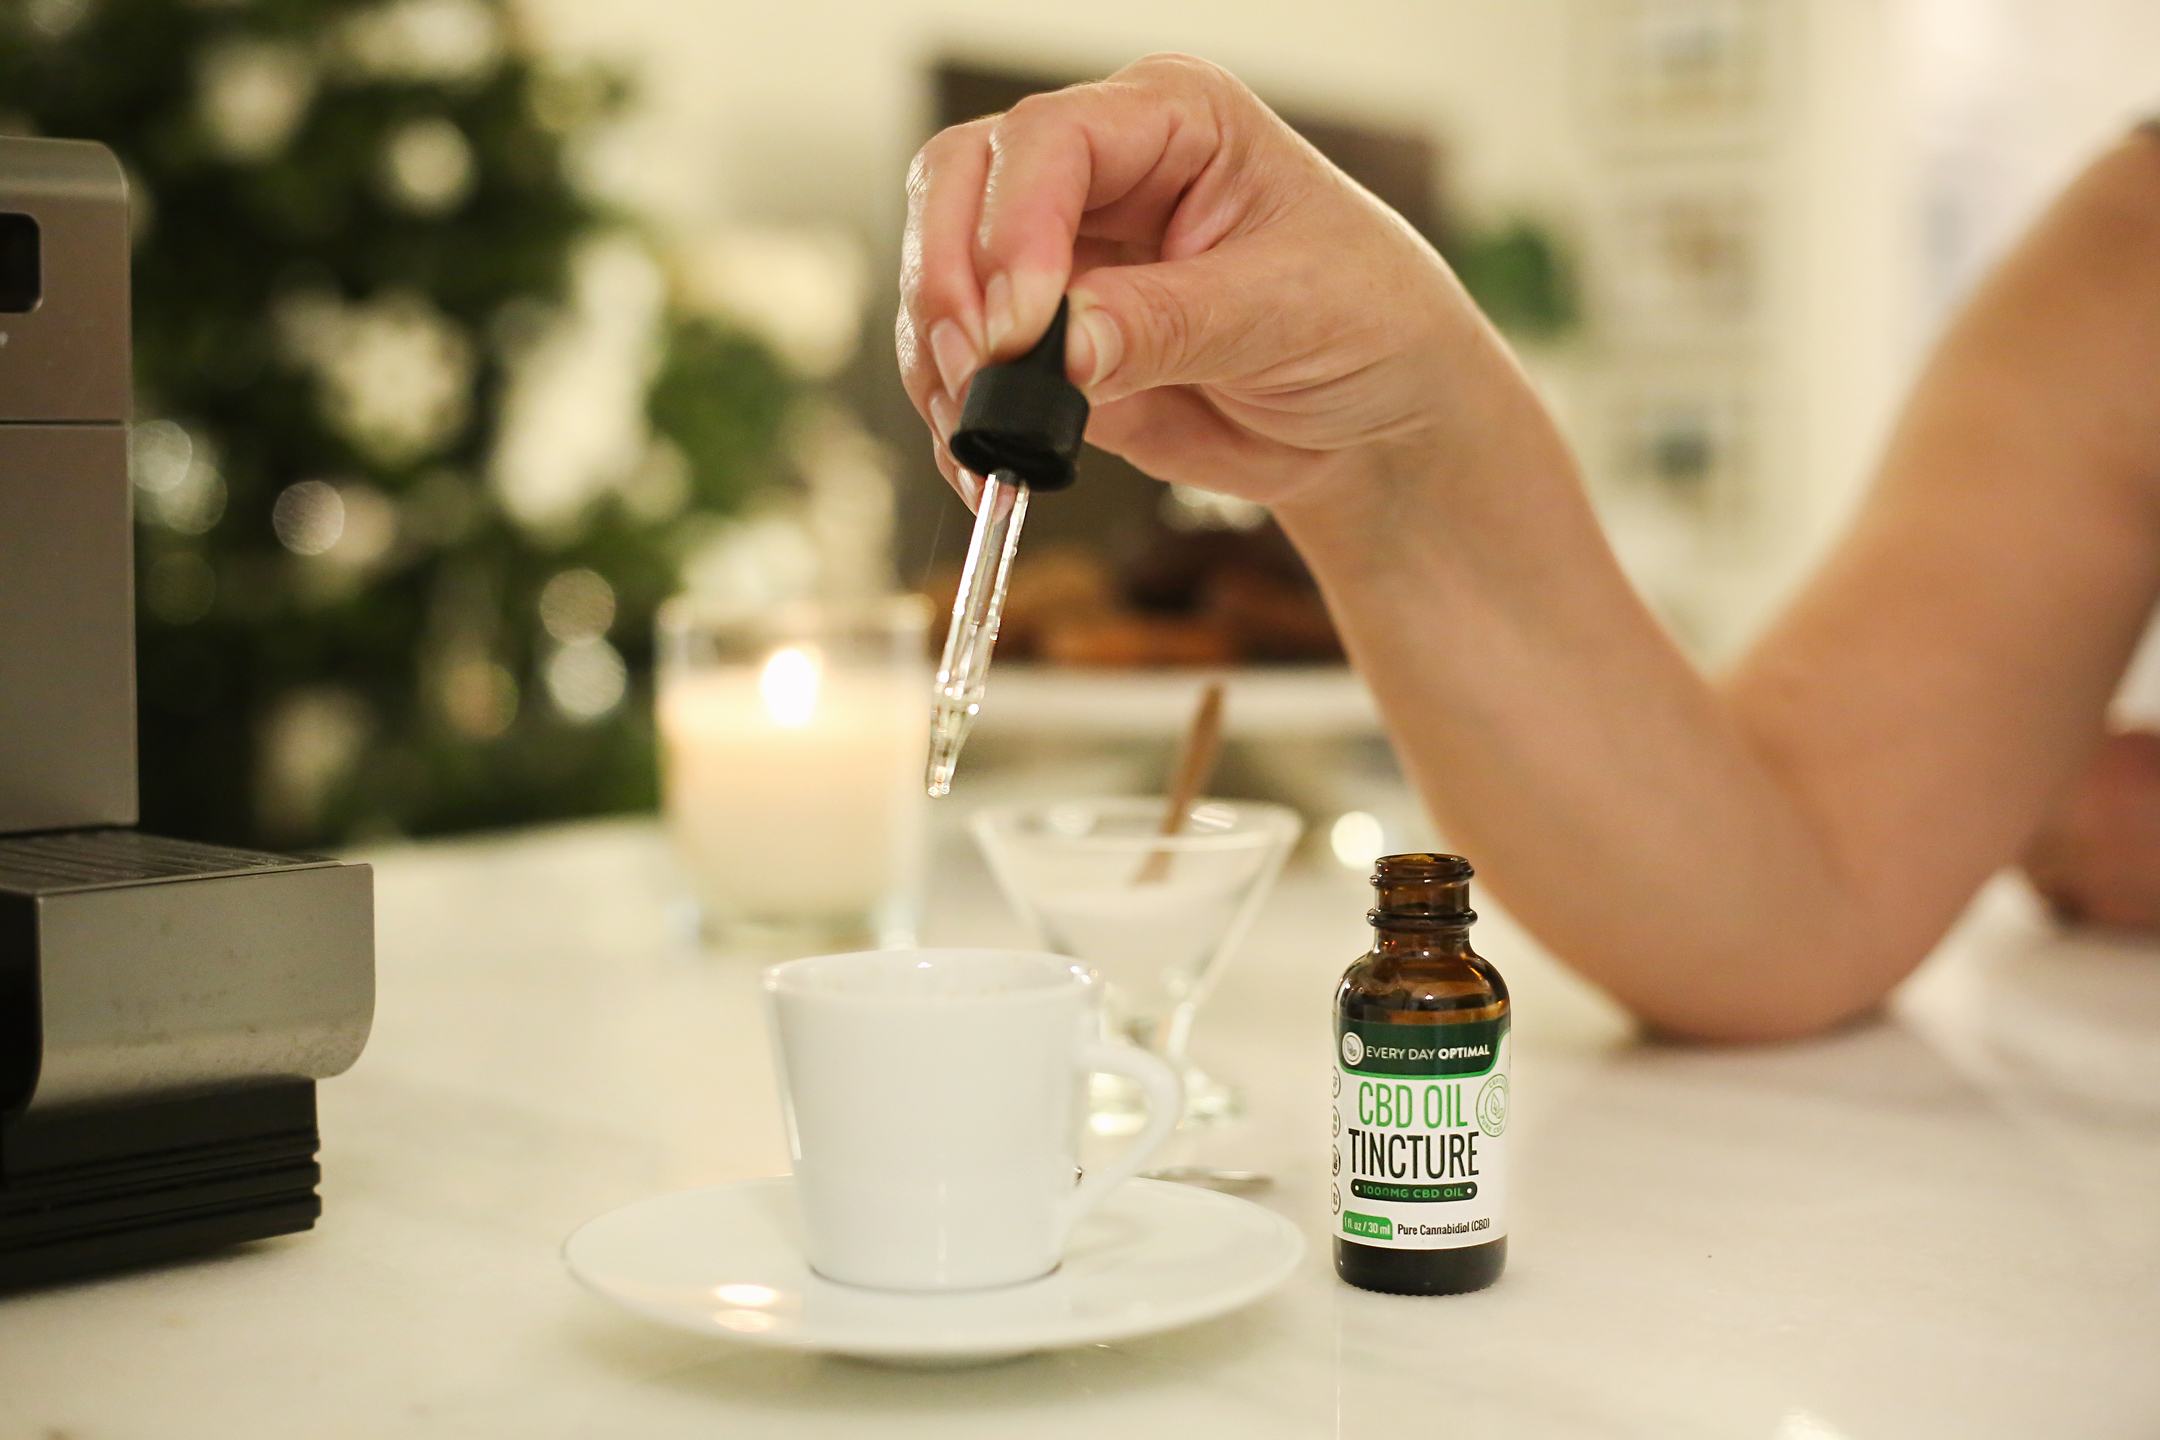 In this article we compare CBD vs. CBN for their different health benefits. A person drops a dropperful of CBD oil from a bottle of Every Day Optimal into a cup of espresso.